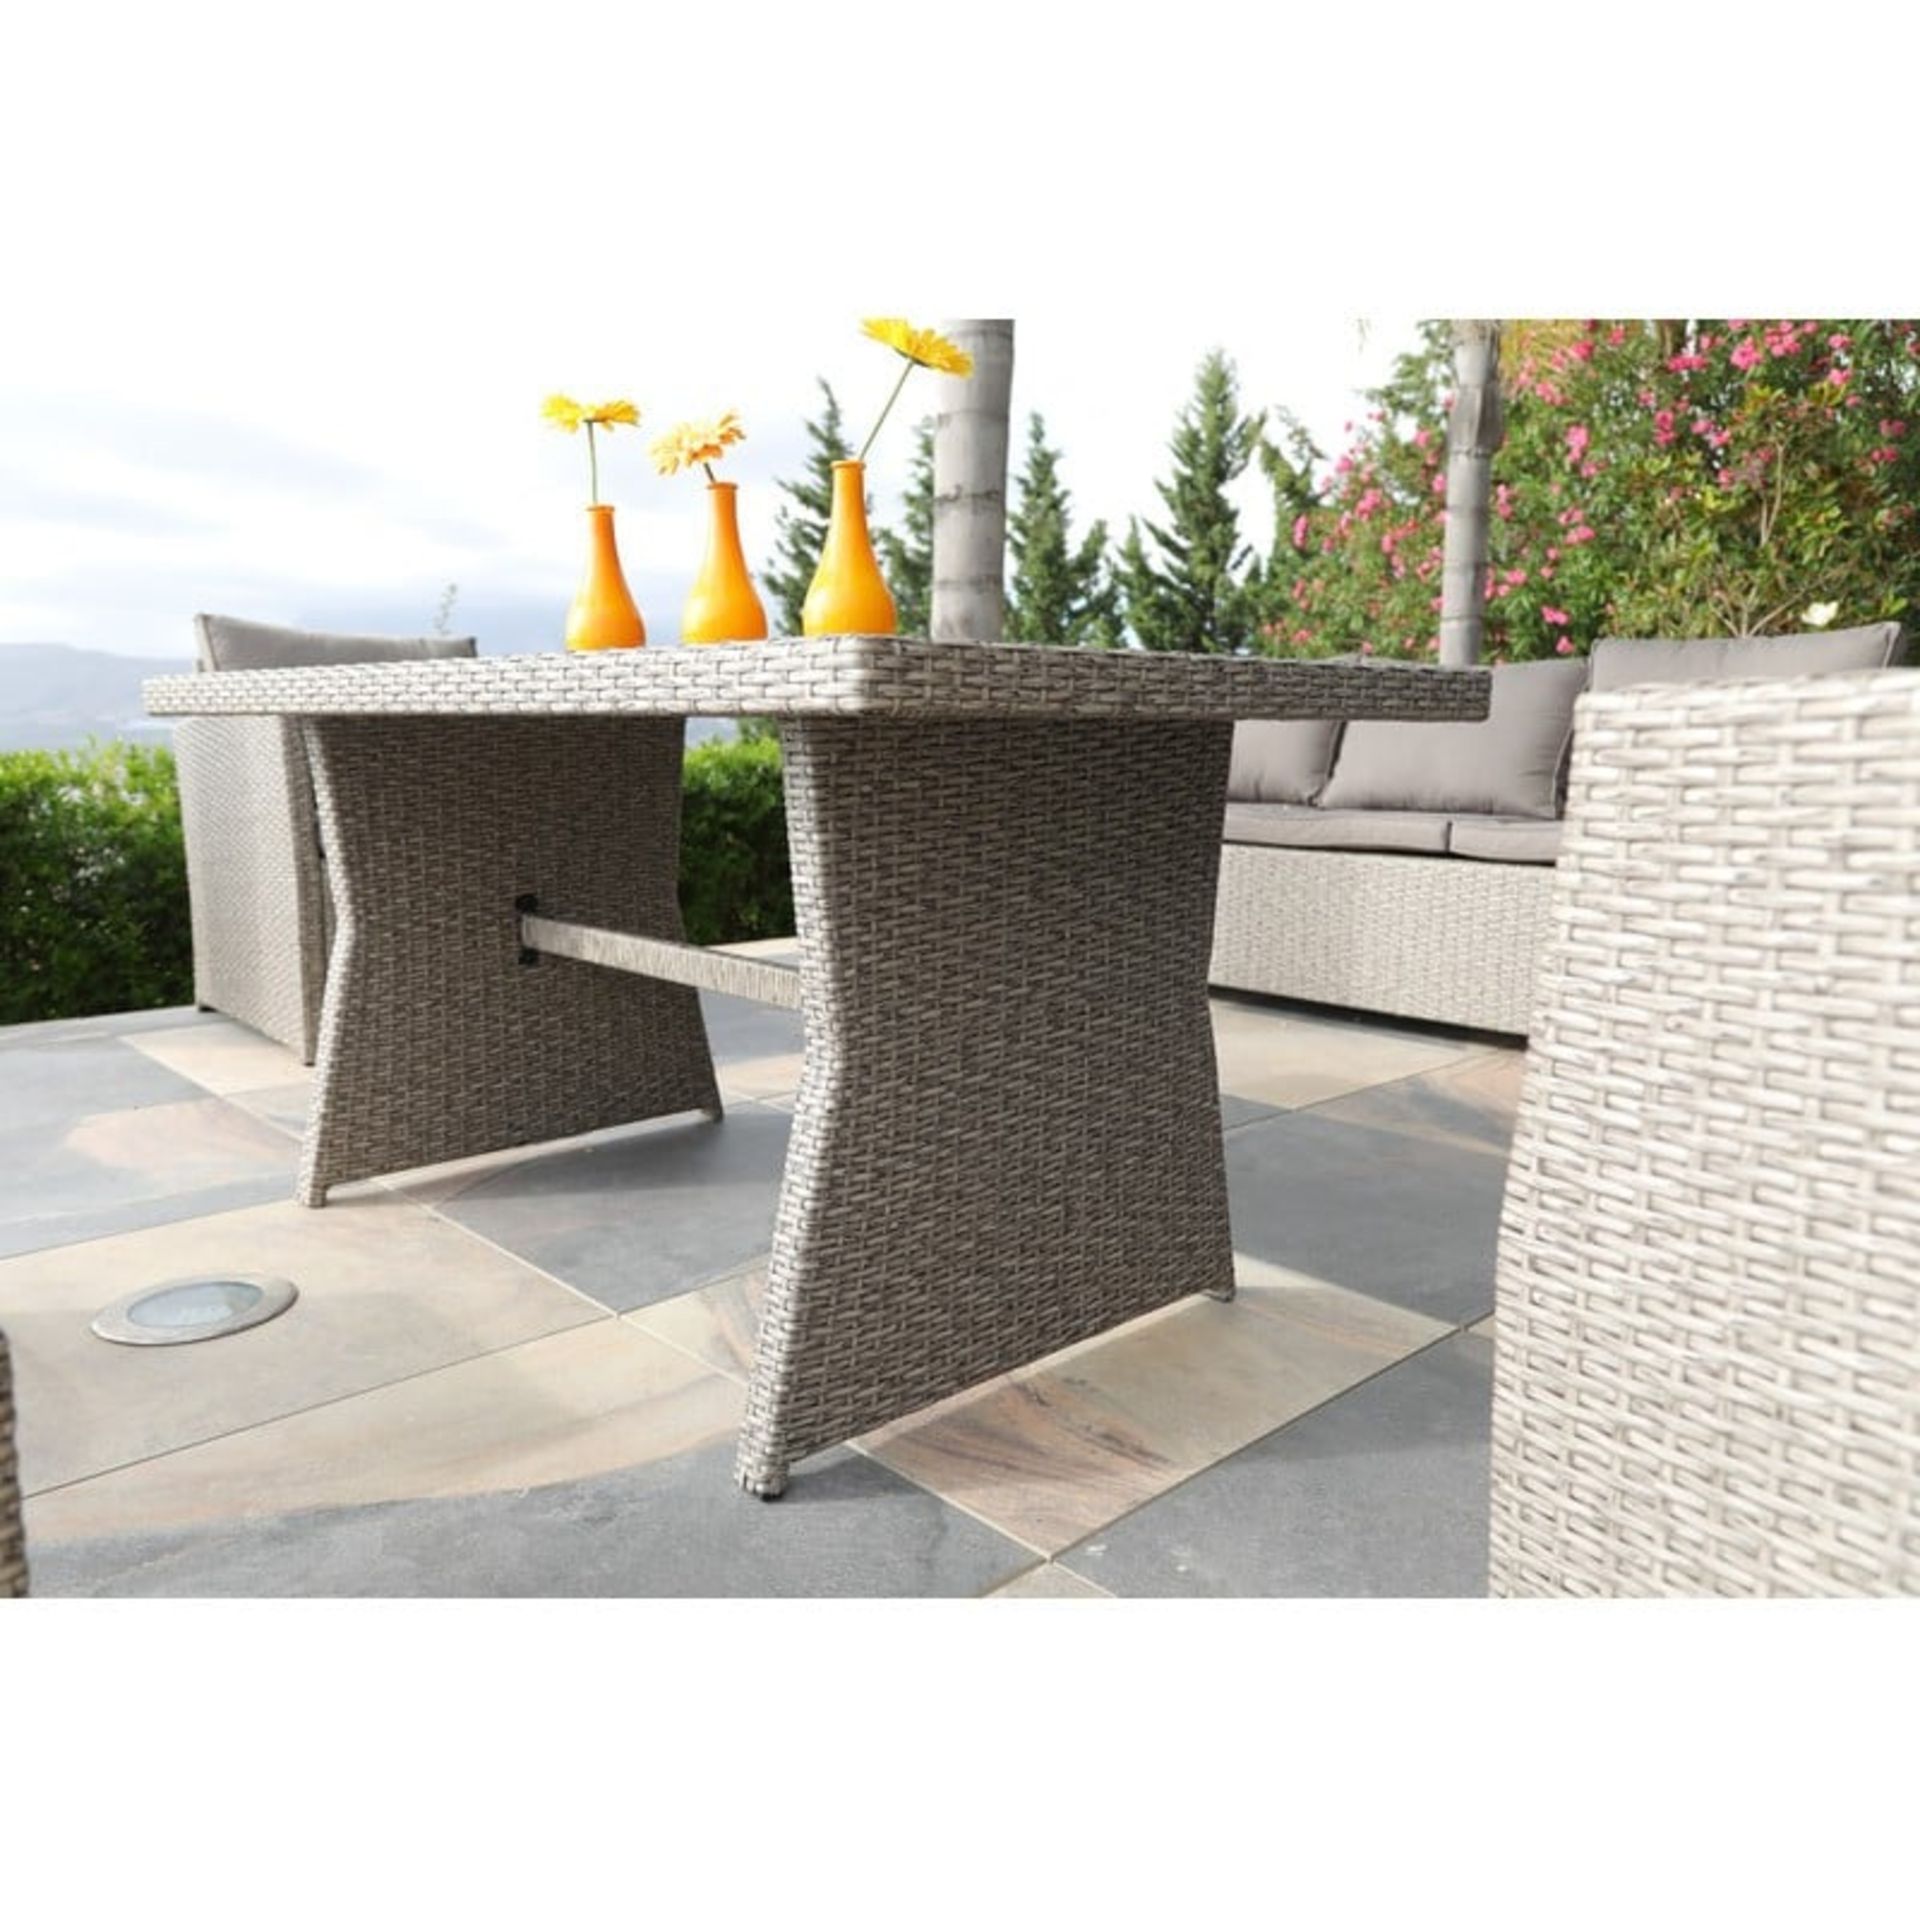 * 3 xBrand New - In Cardboard Boxes - Garden Rattan Furntiure Set. Brown wicker with Brown Cushions. - Image 2 of 11